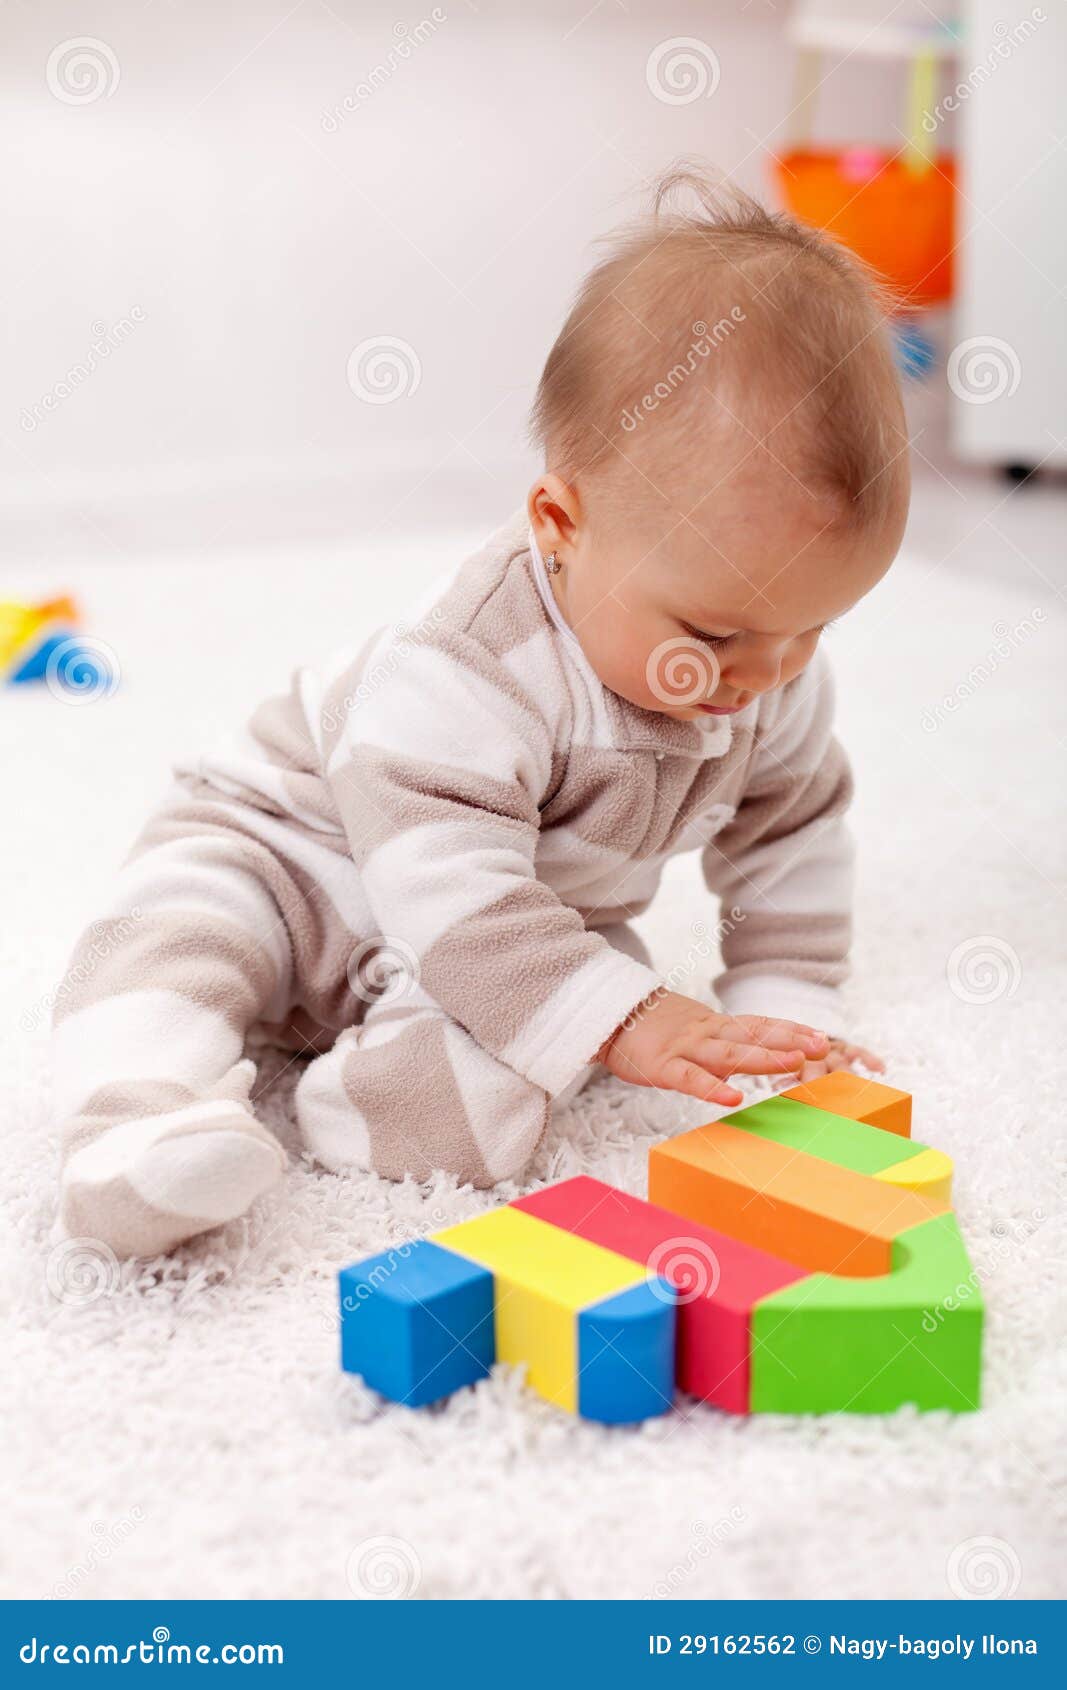 Baby Girl Playing Eith Wooden Blocks Stock Photography - Image 